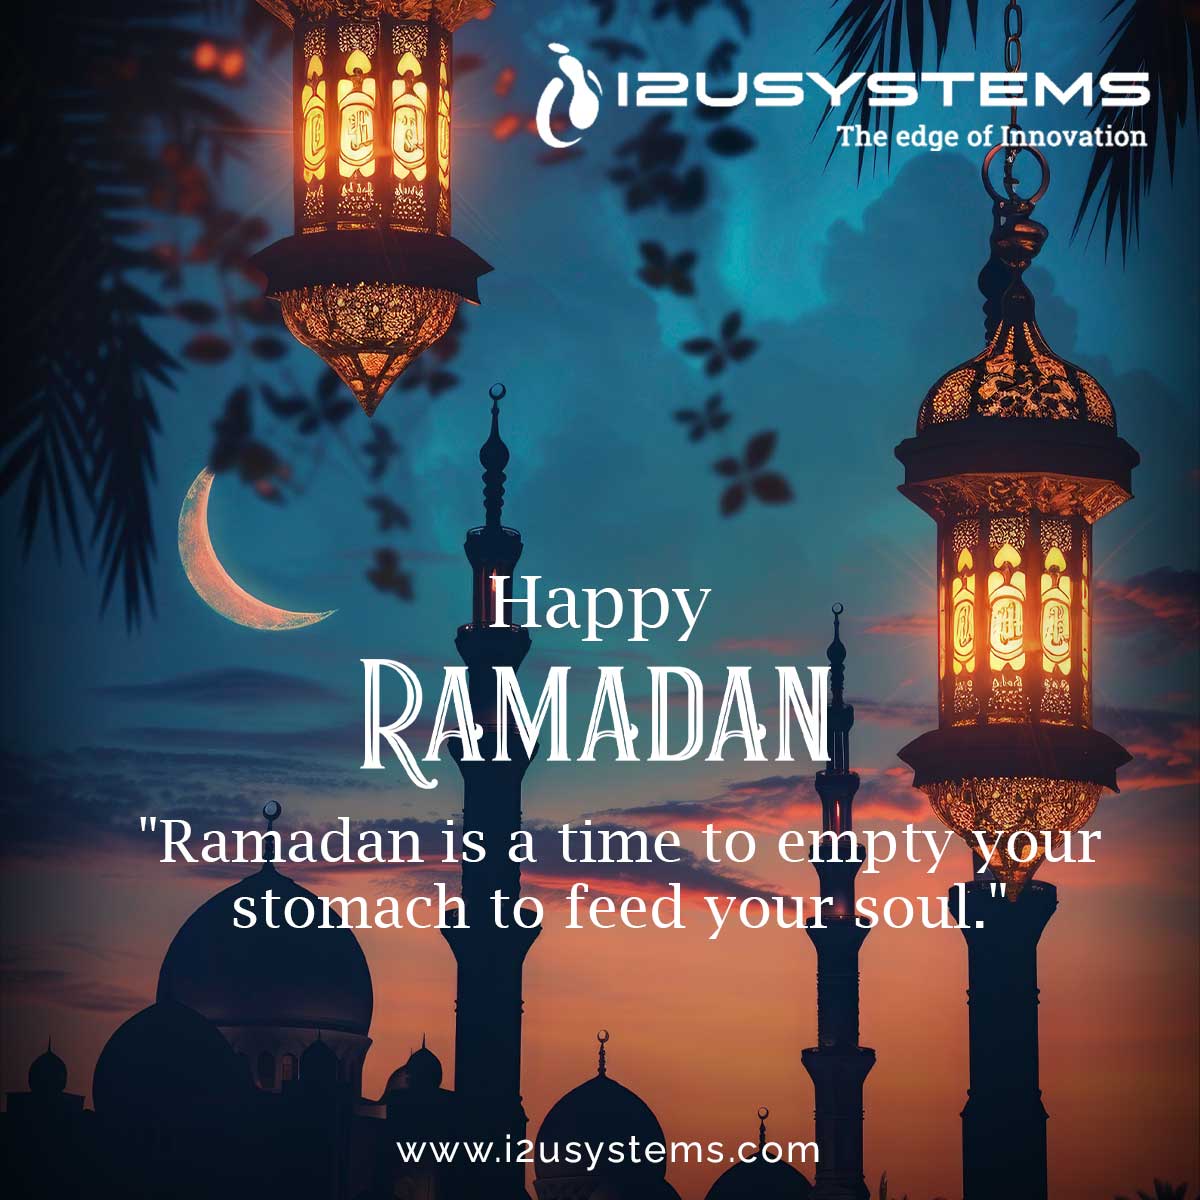 Happy Ramadan..! 'Ramadan is a time to empty your stomach to feed your soul.' #i2usystems #c2crequirements #w2jobs #directclient #directclients #i2u #i2usystemsinc #usaitjobs #usajobs #stategovernment #jobs #recruiters #benchsales #IOT #happy #ramadan #heaven #god #month